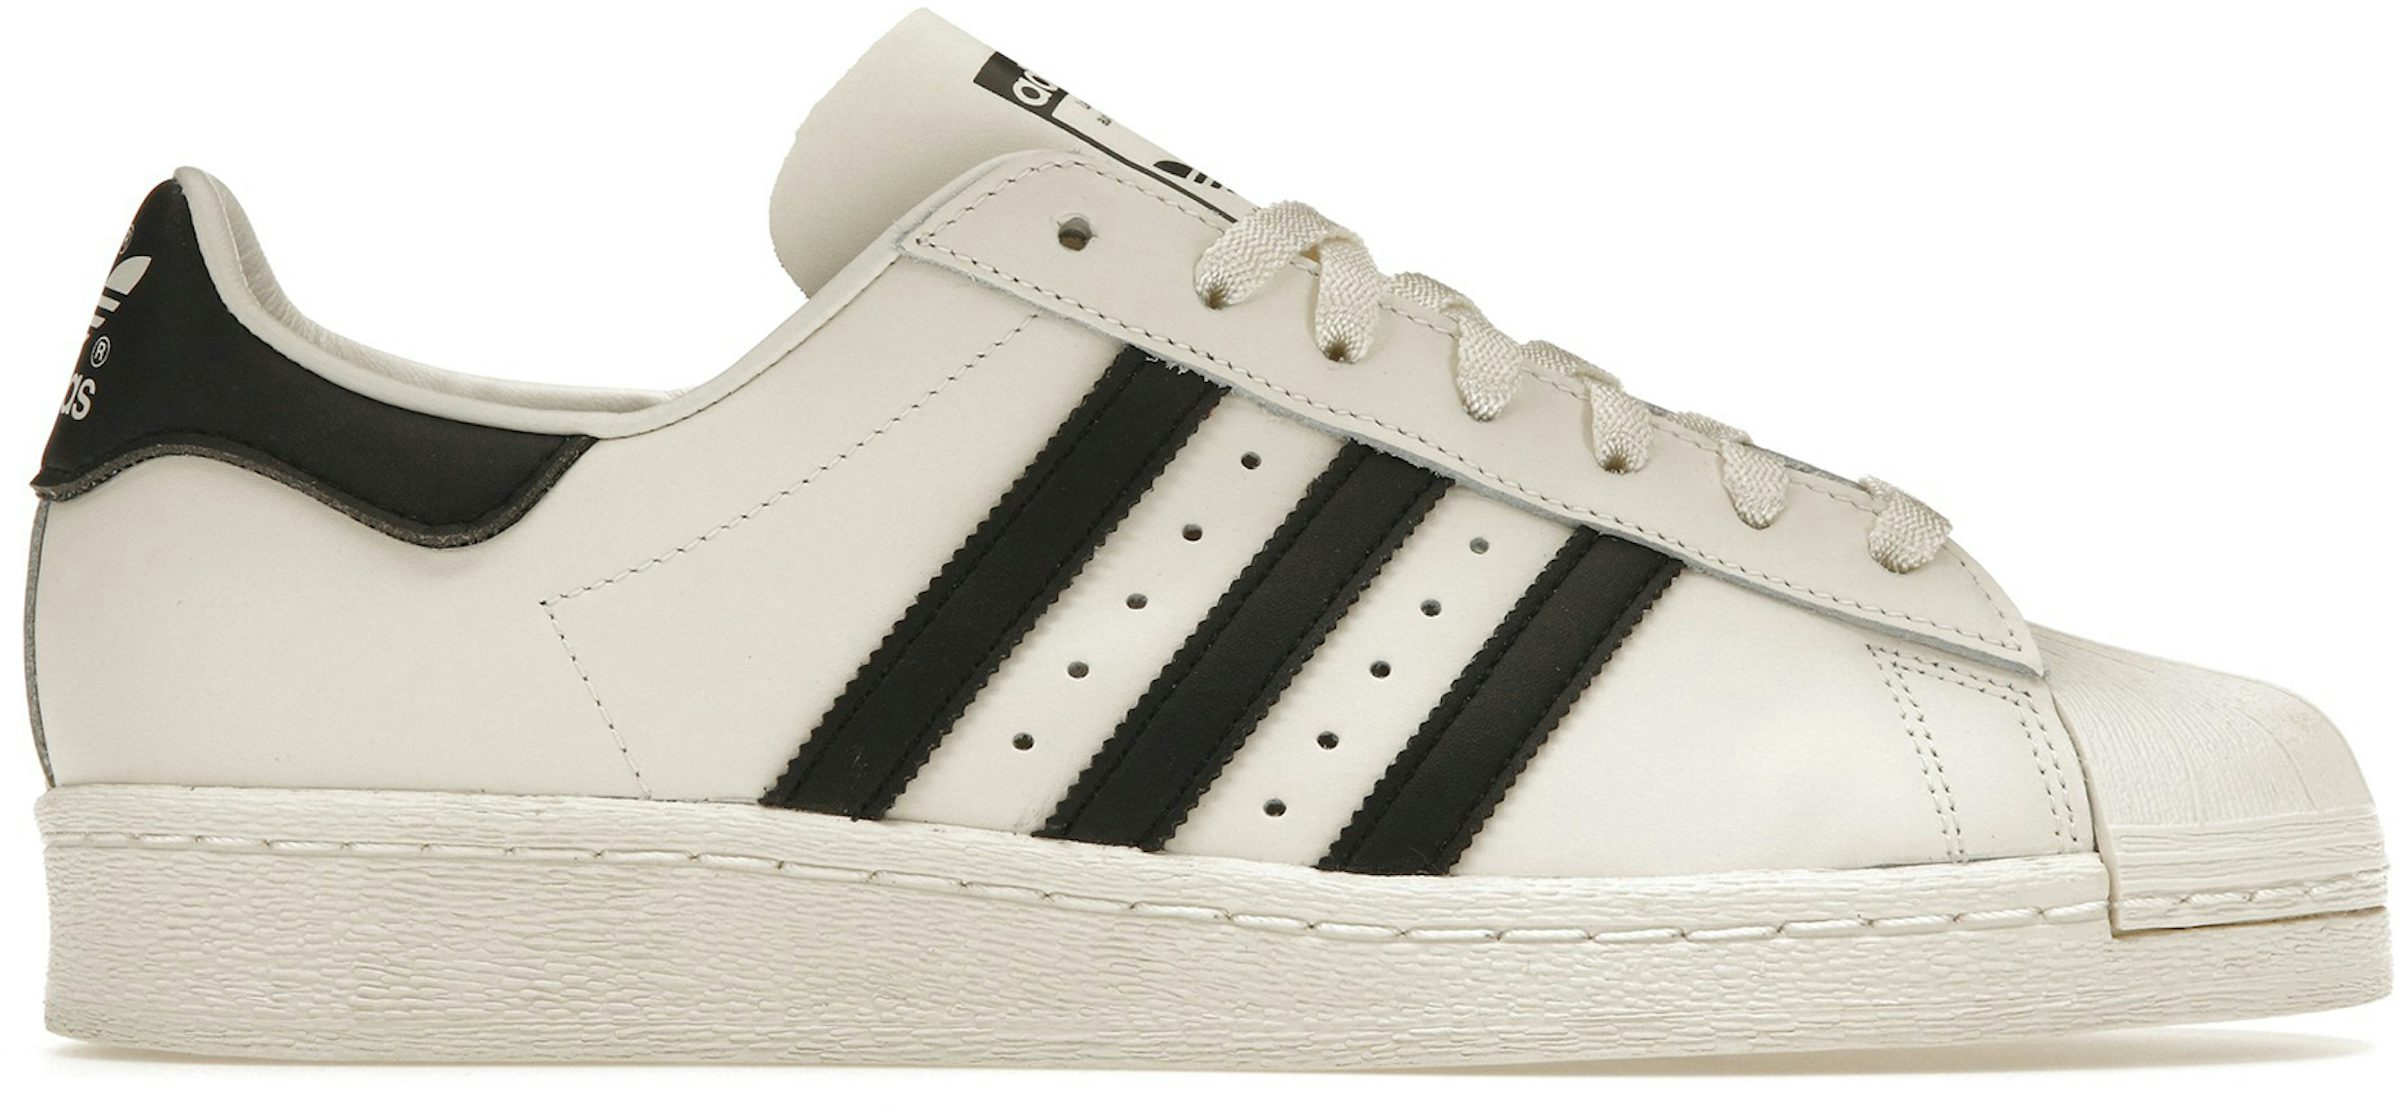 HIGHTOP Adidas Superstar 789002 White with Black Stripe Shell Toe Size 3Y